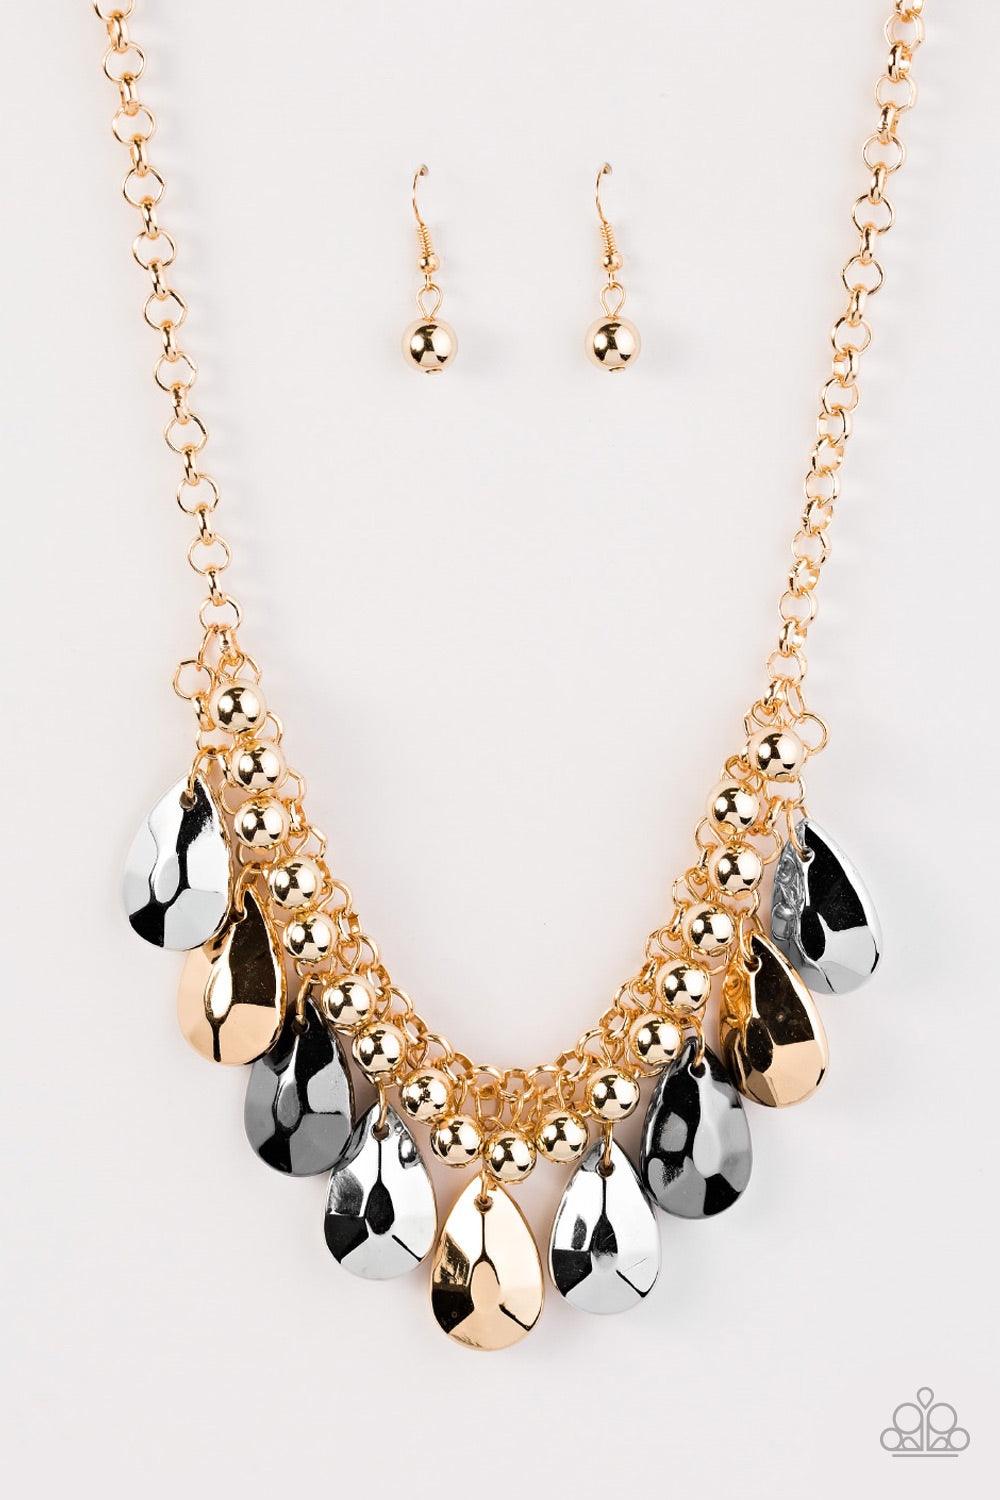 Paparazzi Accessories La DIVA Loca - Multi Faceted silver, gold, and gunmetal teardrops trickle from the bottom of interwoven gold chains, creating a dramatic fringe below the collar. Classic gold beads swing from the bold chains, adding a timelessly chic